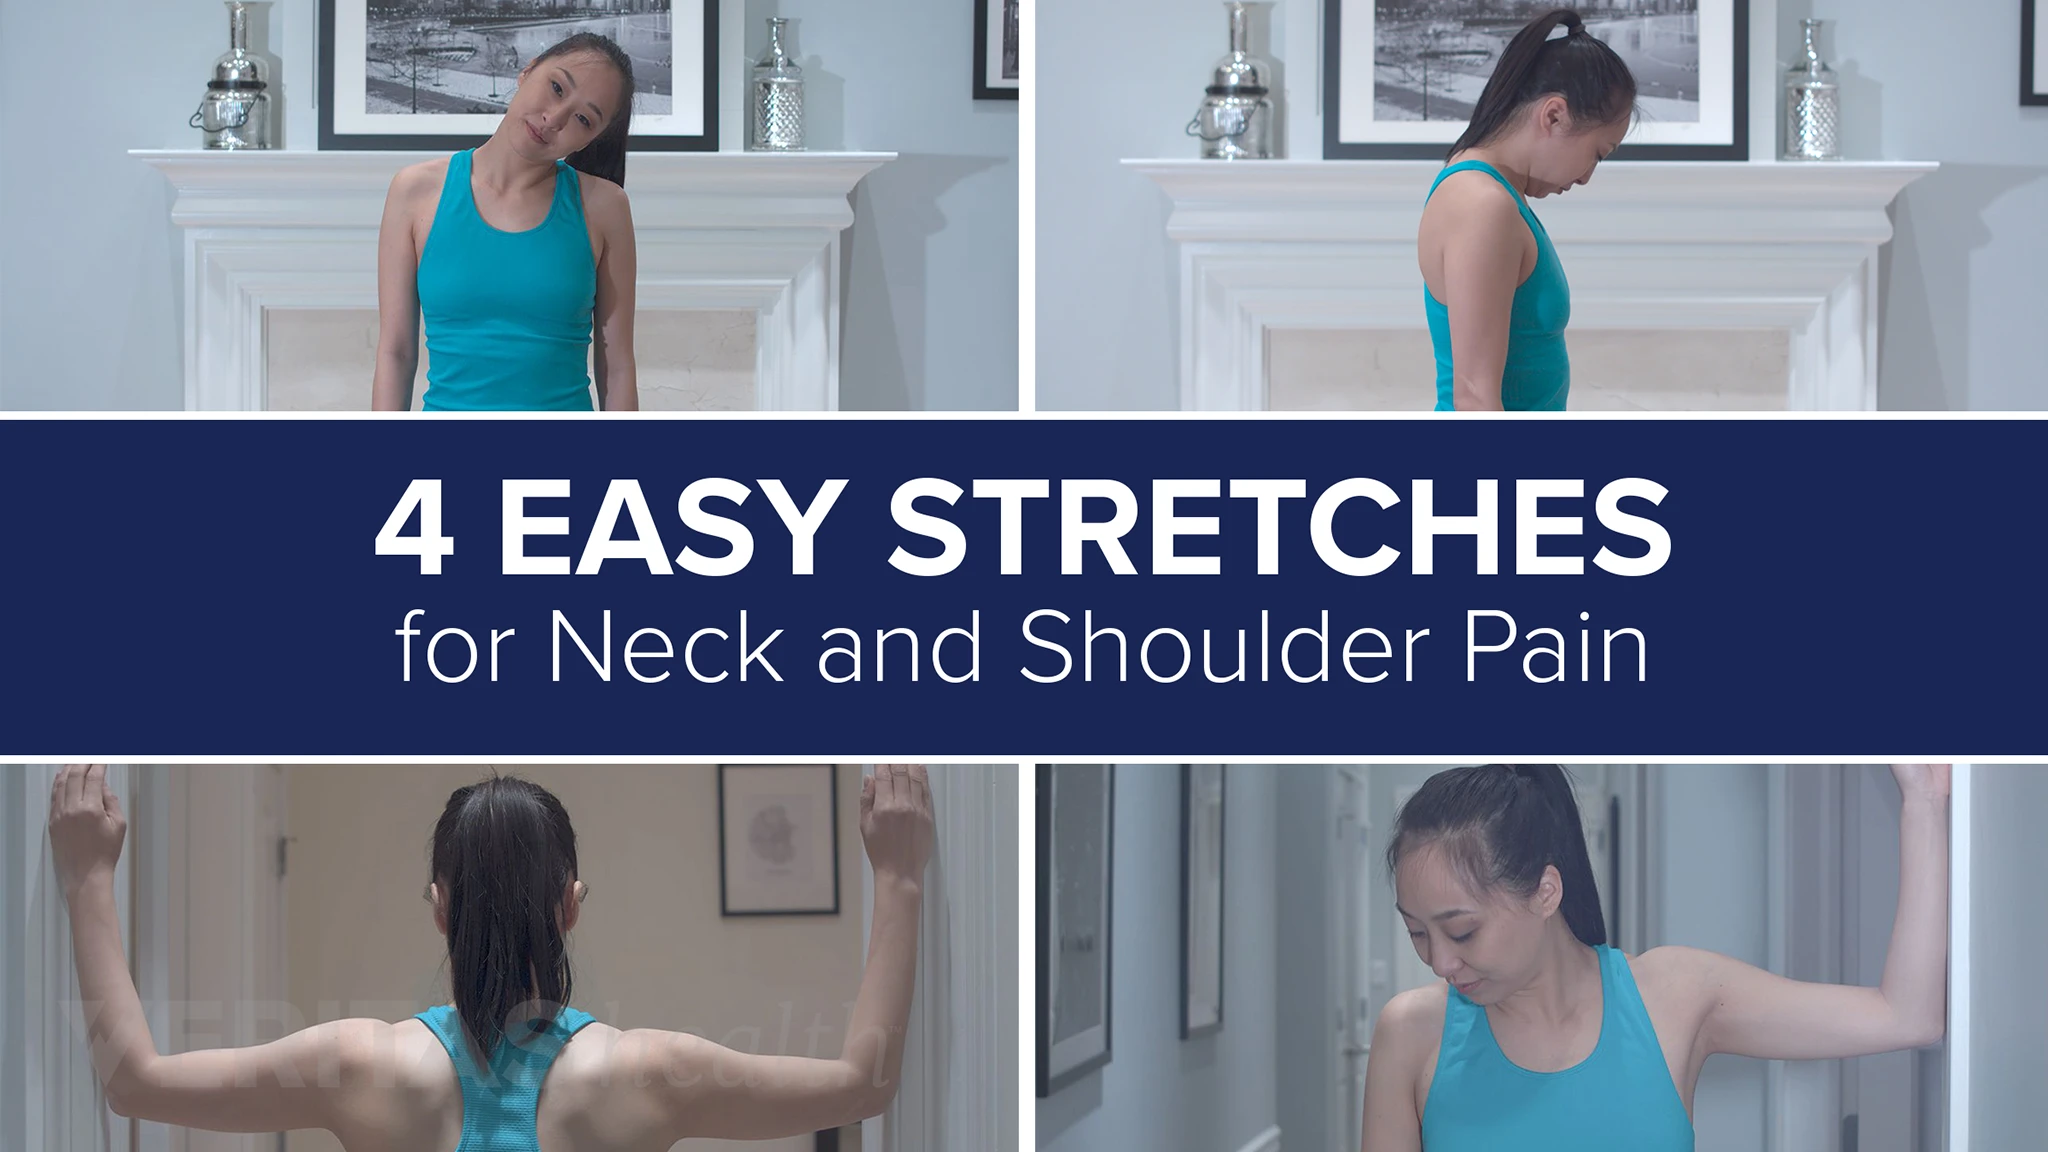 Home exercises to reduce Neck and Shoulder pain Relief